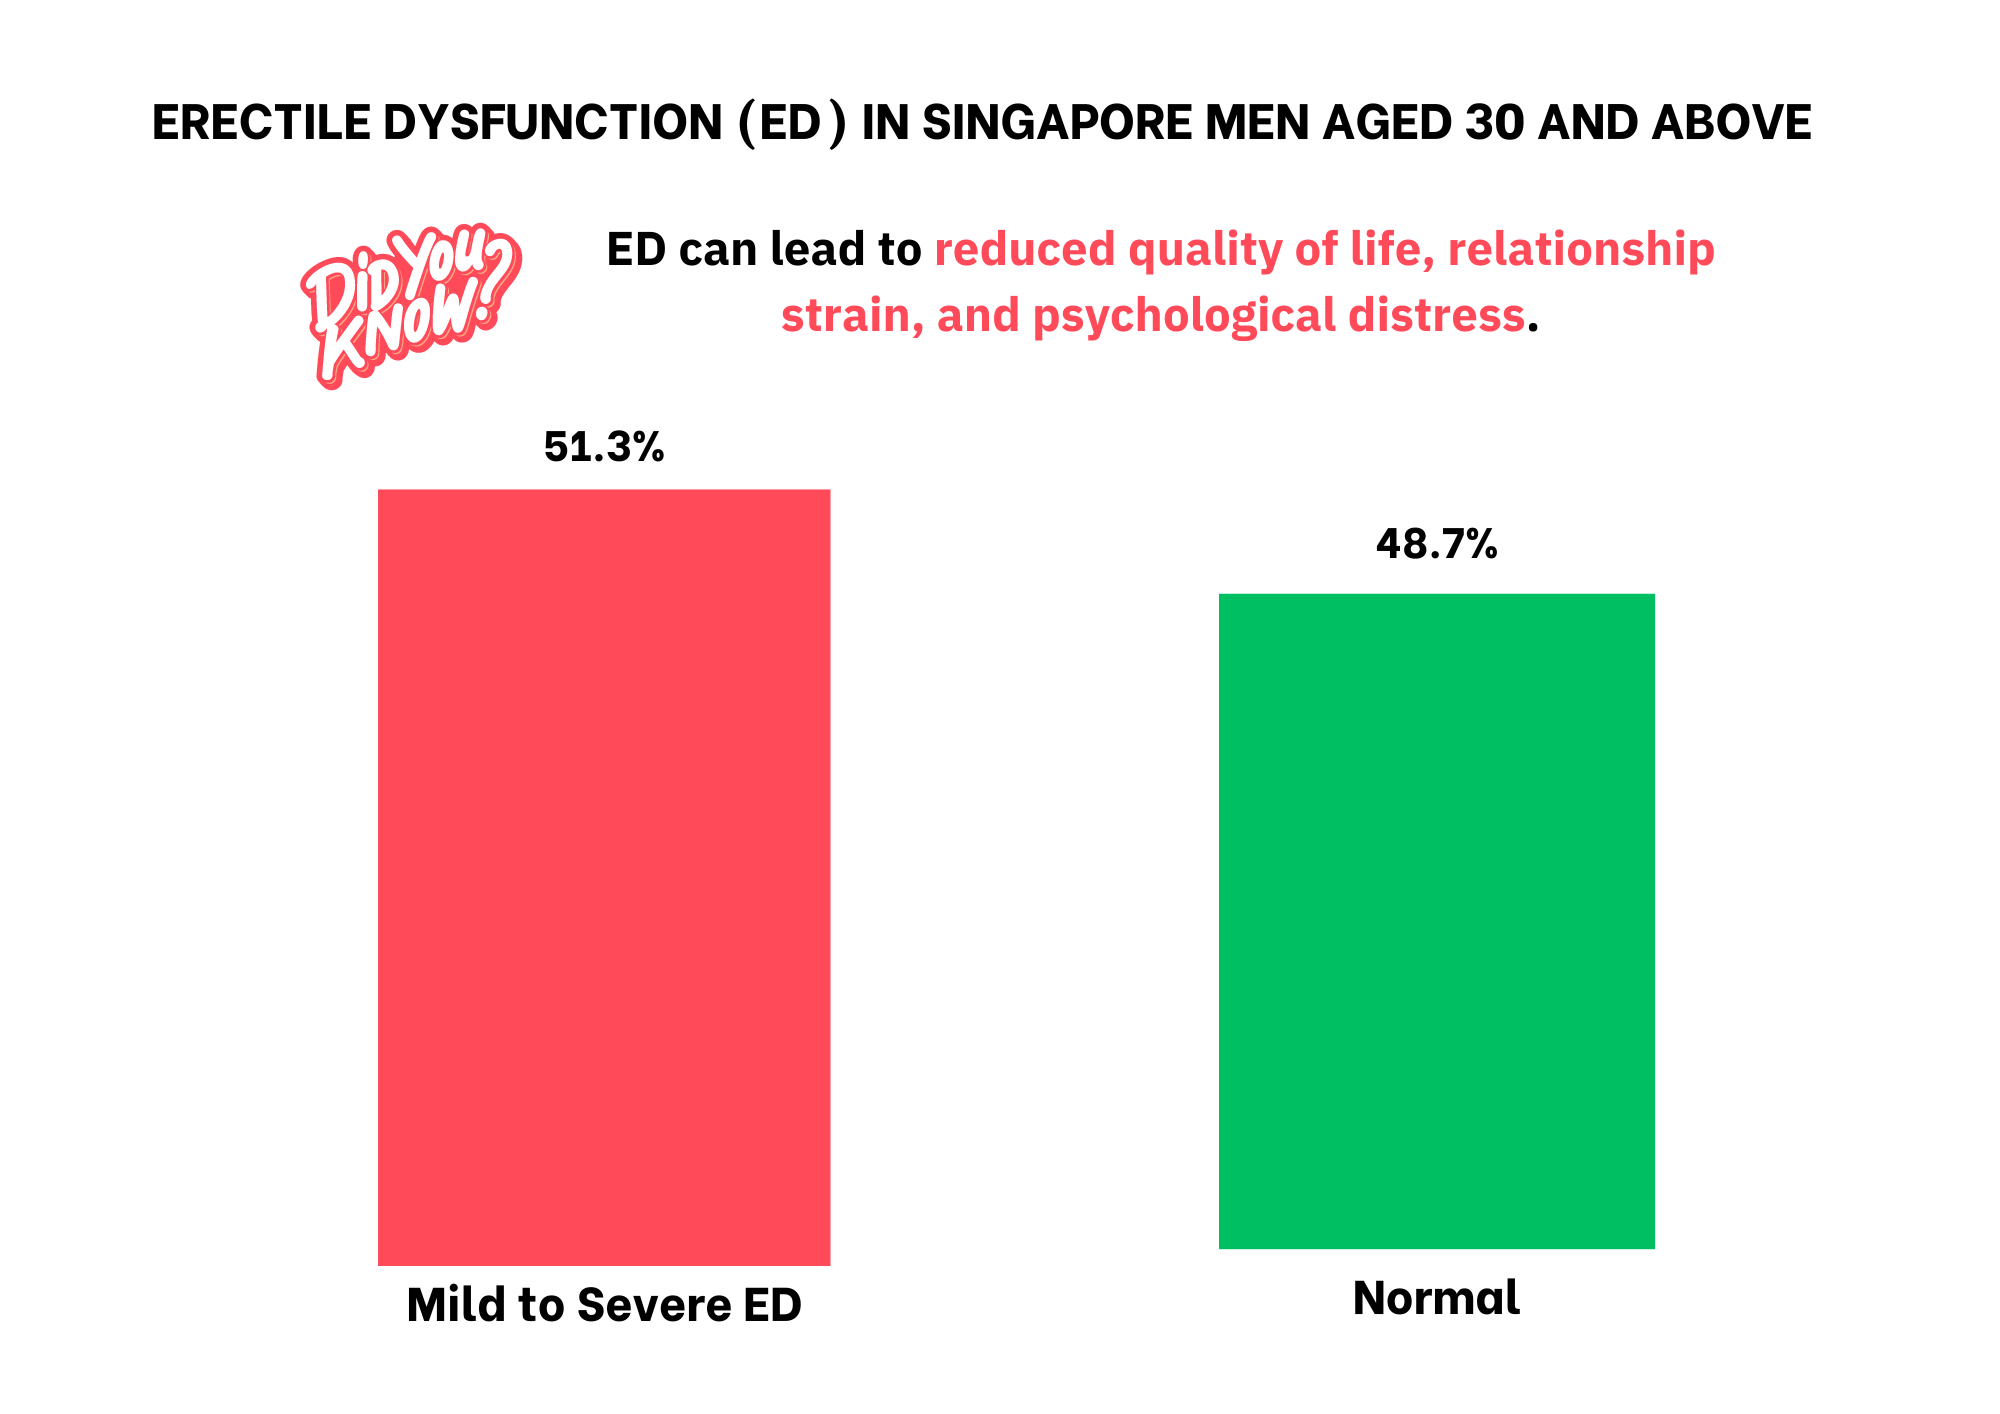 51.3% of men in Singapore had some form of Erectile Dysfunction.